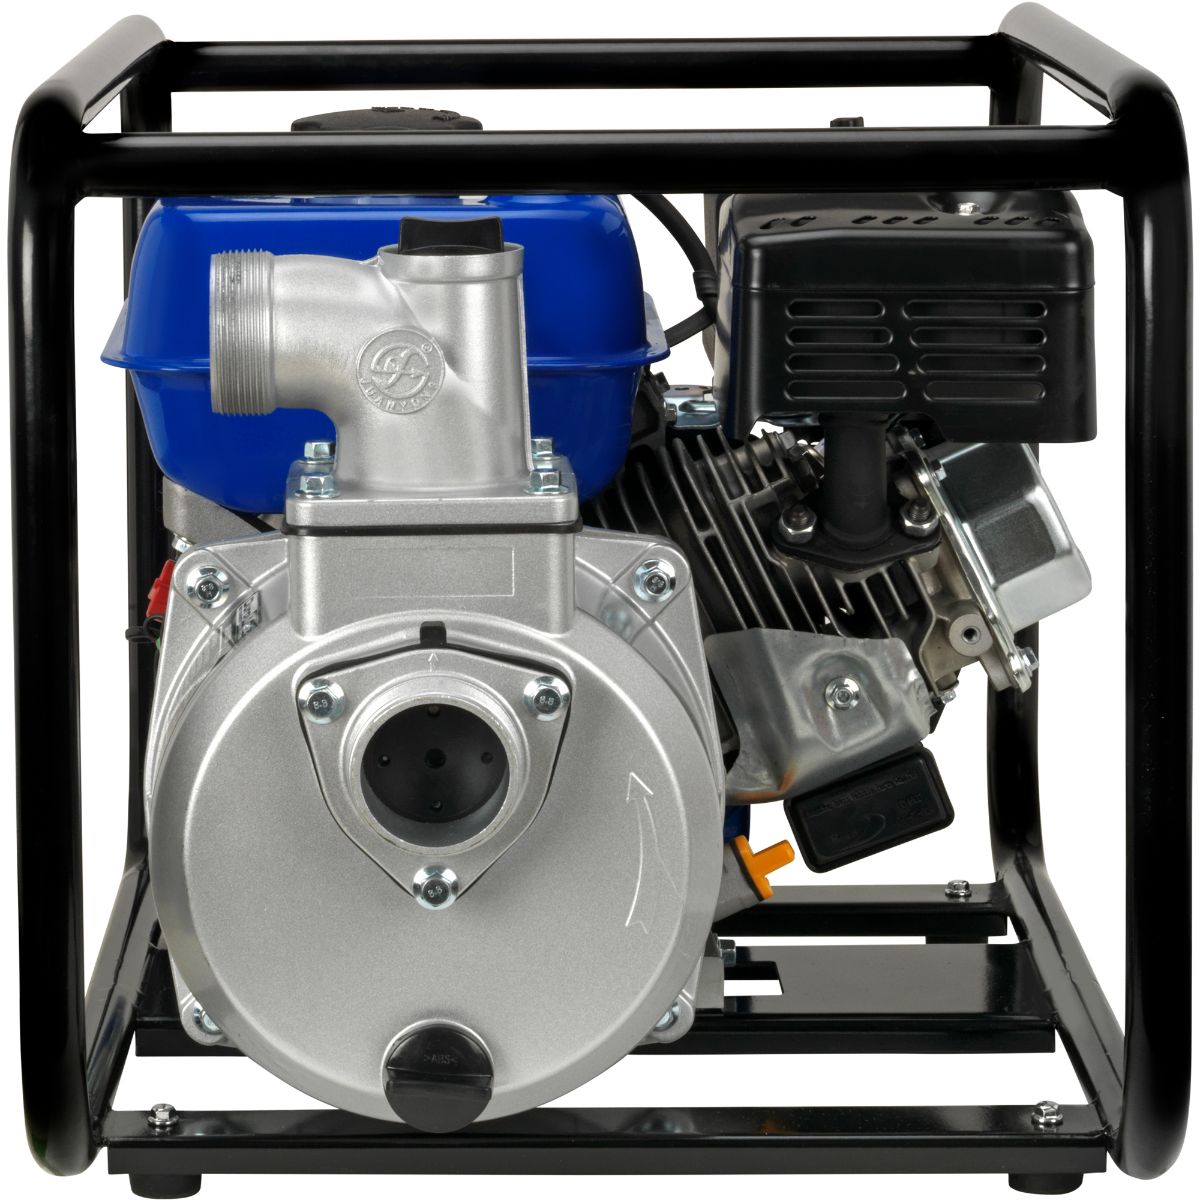 DuroMax 208cc 158-Gpm 3,600-Rpm 2-Inch Gasoline Engine Portable Water Pump - XP652WP - New Star Living